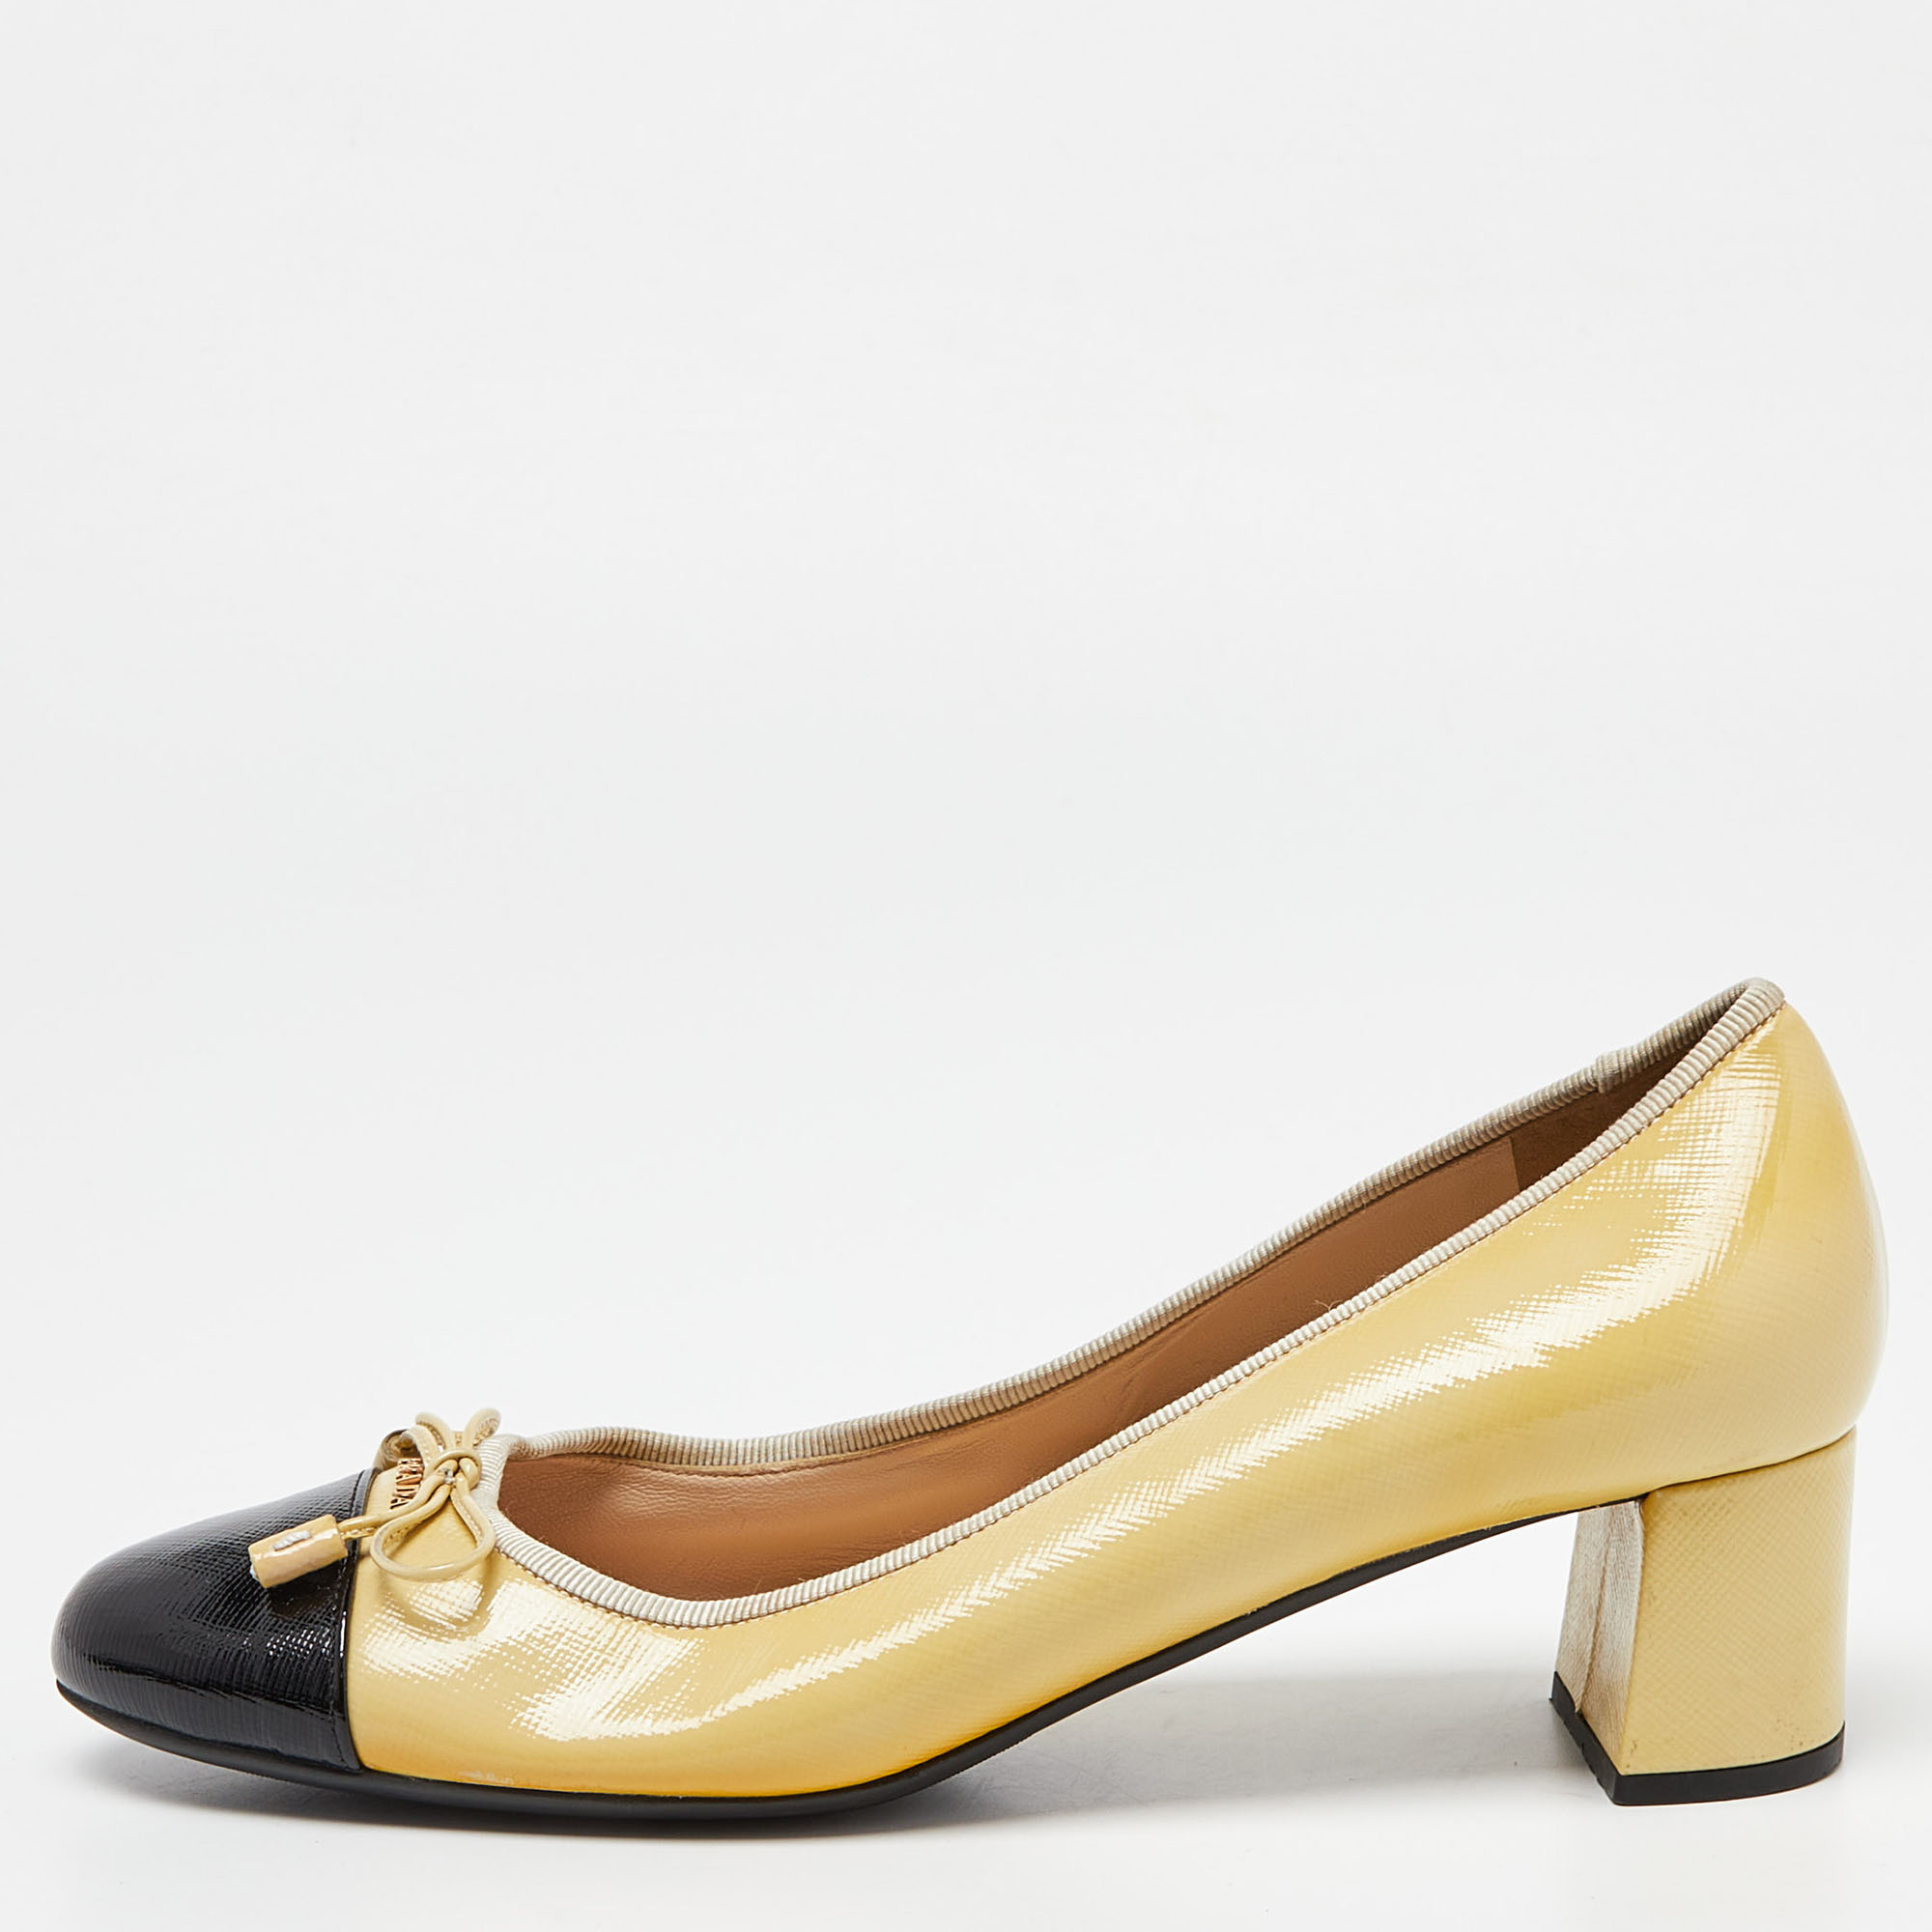 Pre-owned Prada Yellow/black Patent Leather Bow Block Heel Pumps Size 38.5